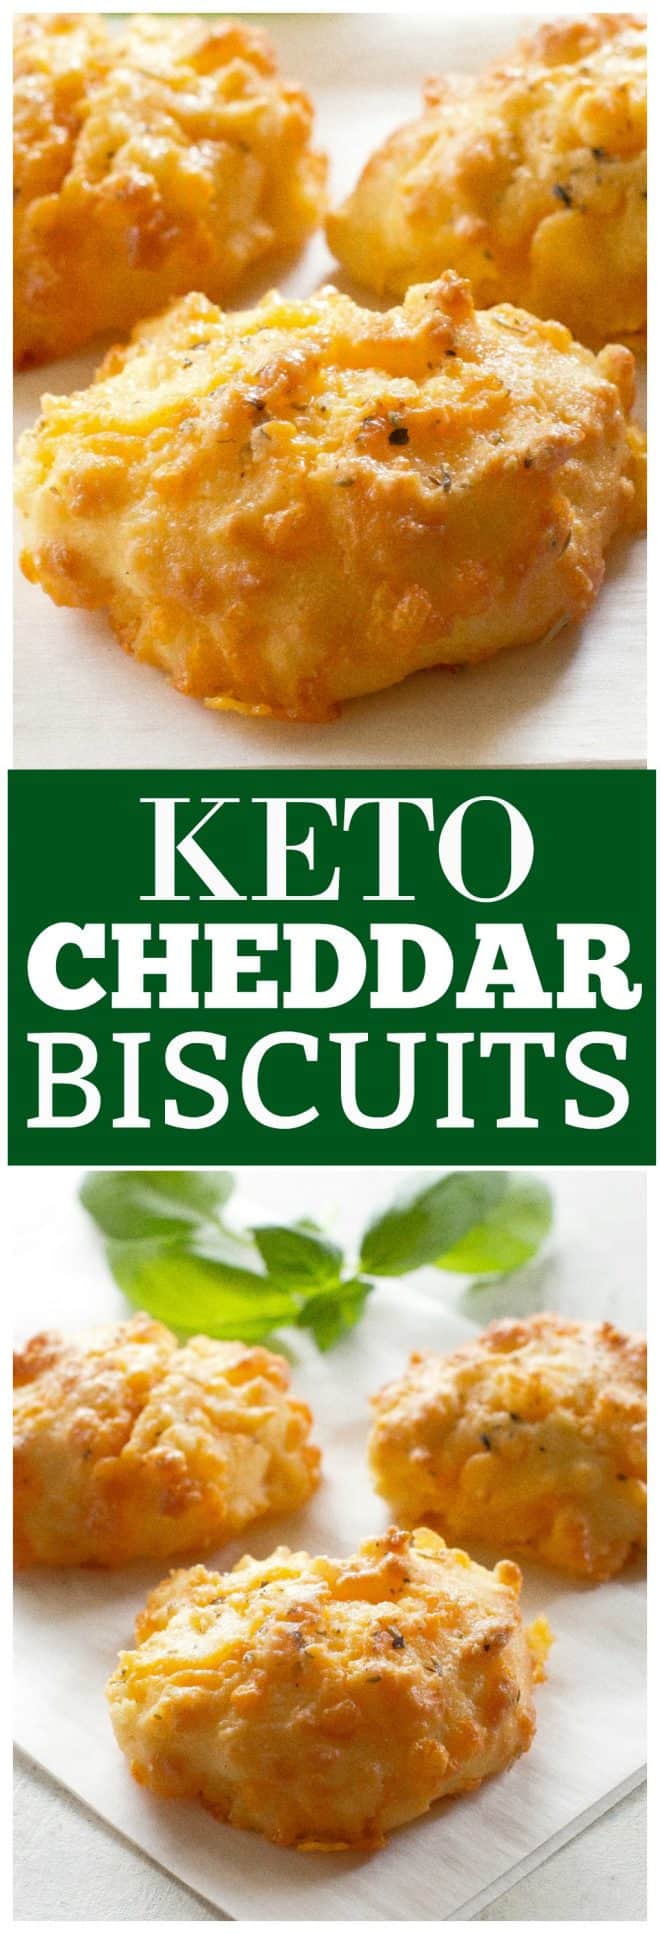 Keto biscuits